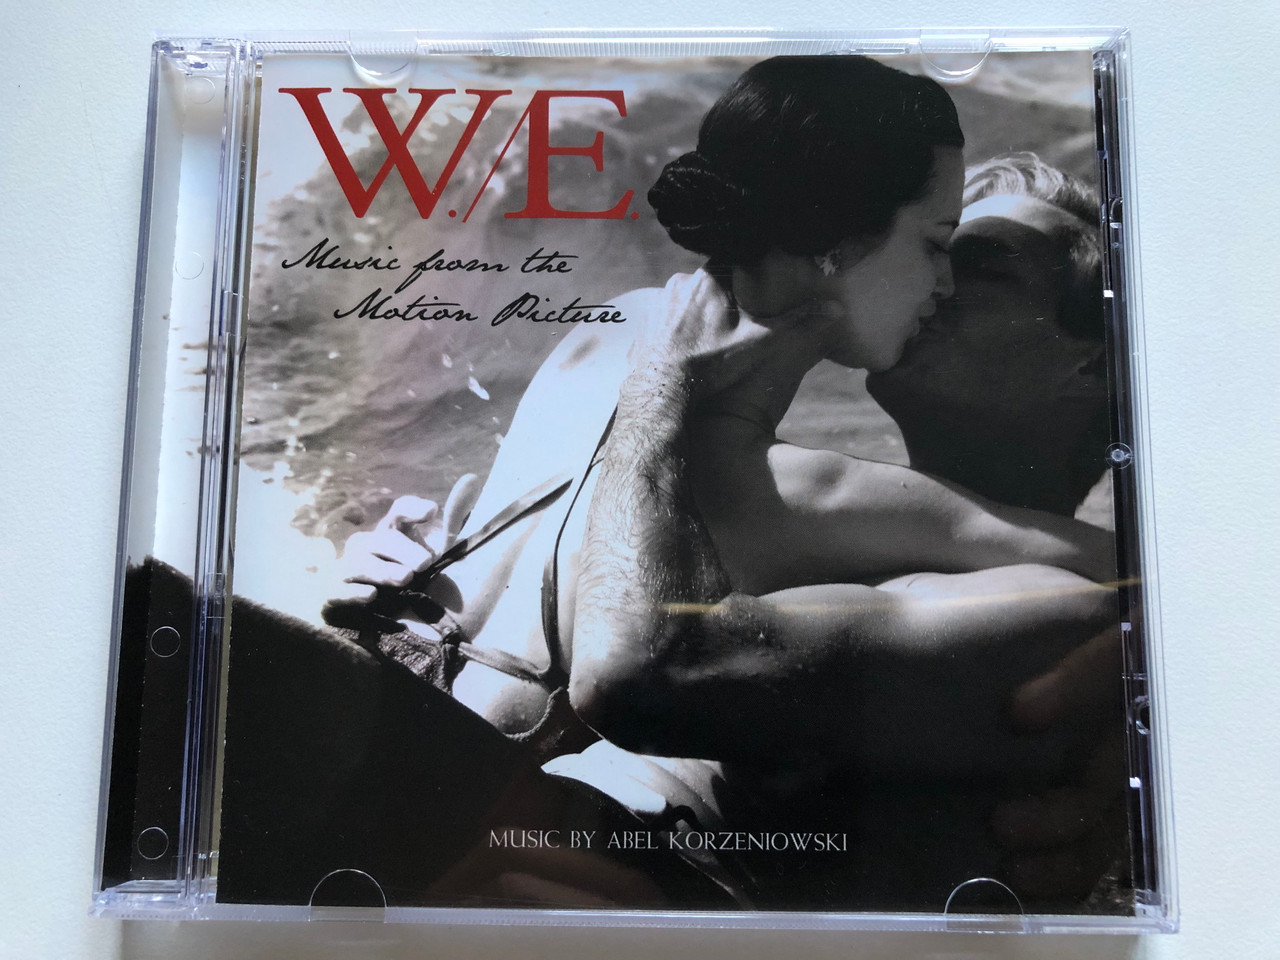 W./E. (Music From The Motion Picture) - Music By Abel Korzeniowski /  Interscope Records Audio CD 2012 / 0602527947310 - Bible in My Language